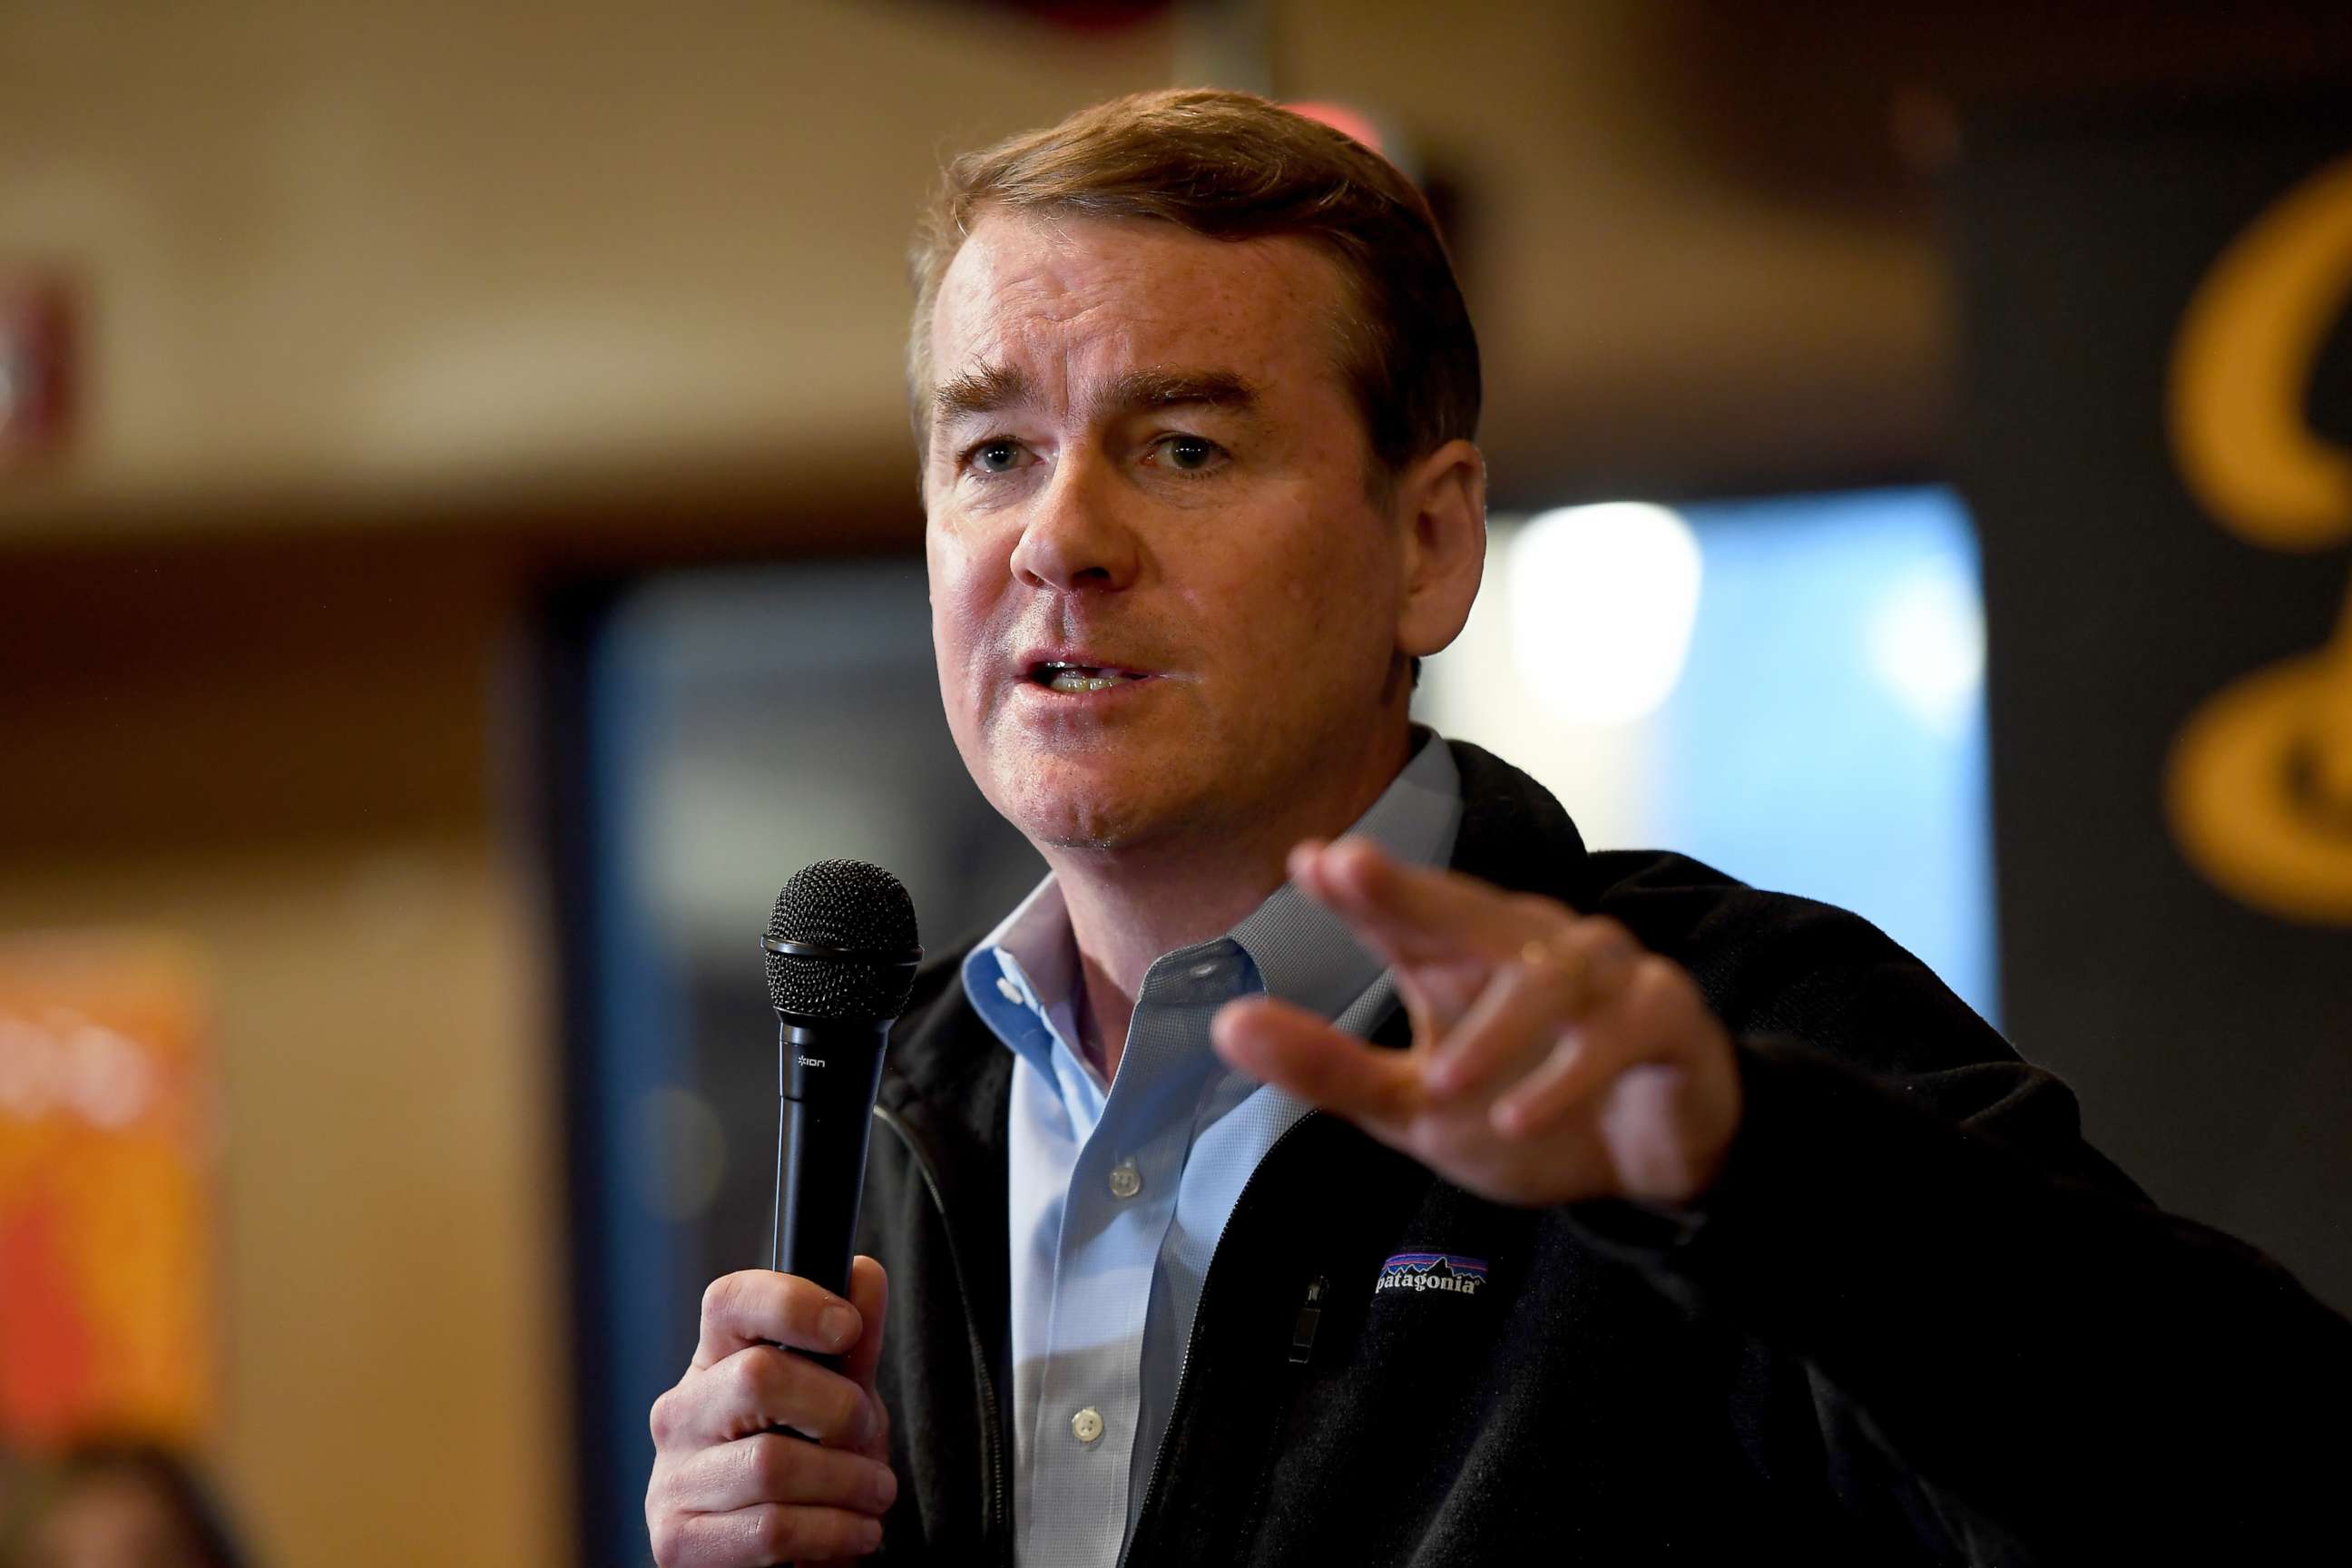 PHOTO: JOHNSTOWN, IA - FEBRUARY 22: Democratic Senator Michael Bennet speaks to the Polk County Democrats at Doc's Lounge February 22, 2019, in Johnston, Iowa. (Photo by Joe Amon/MediaNews Group/The Denver Post via Getty Images)